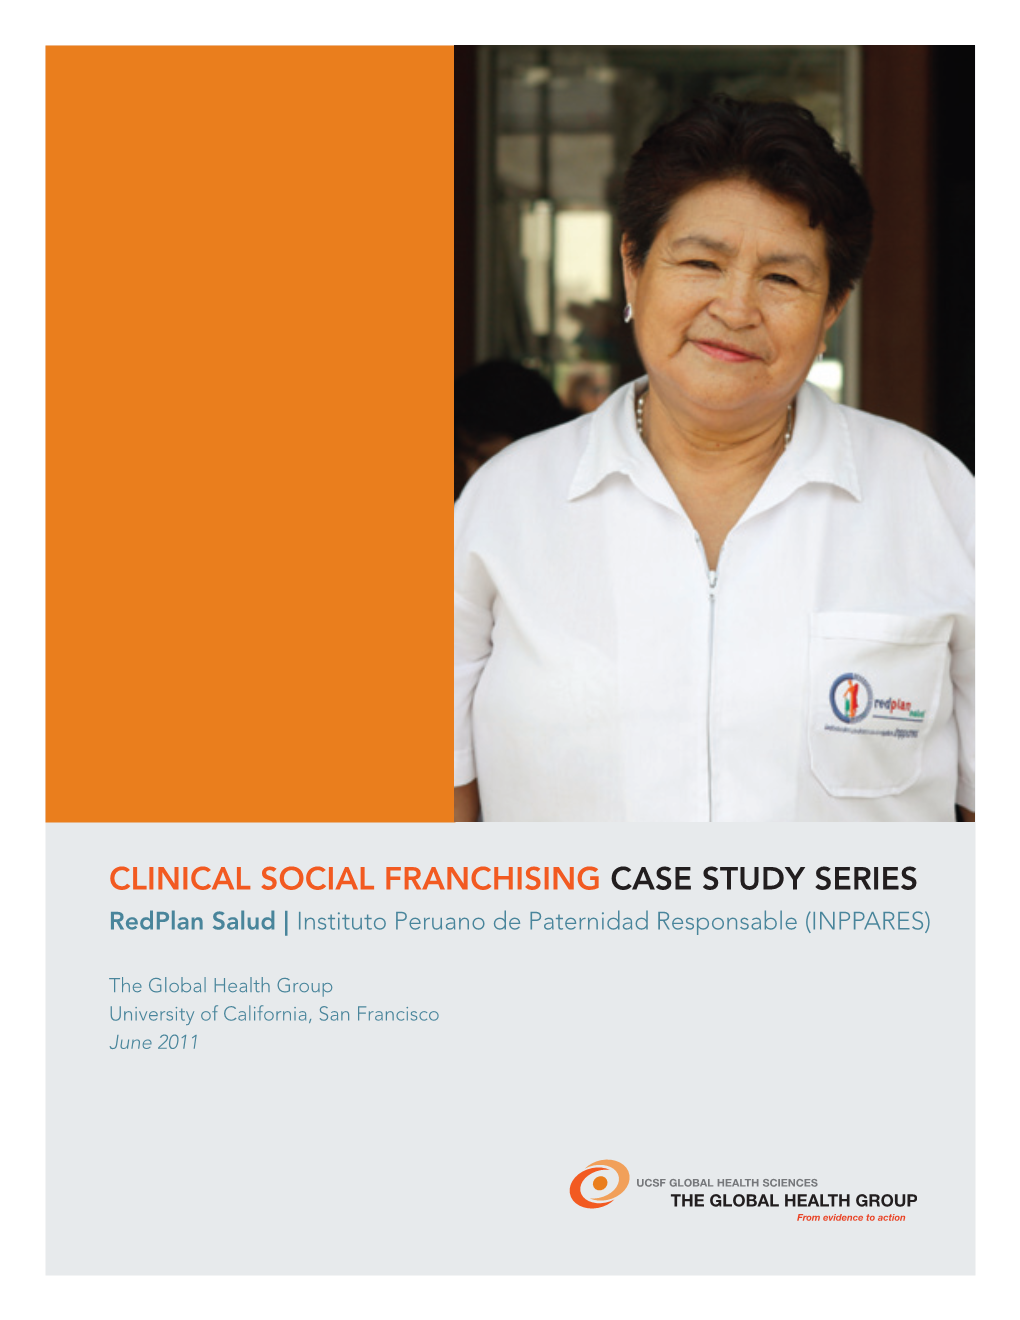 Clinical Social Franchising Case Study Series Redplan Salud | Instituto Peruano De Paternidad Responsable (INPPARES)